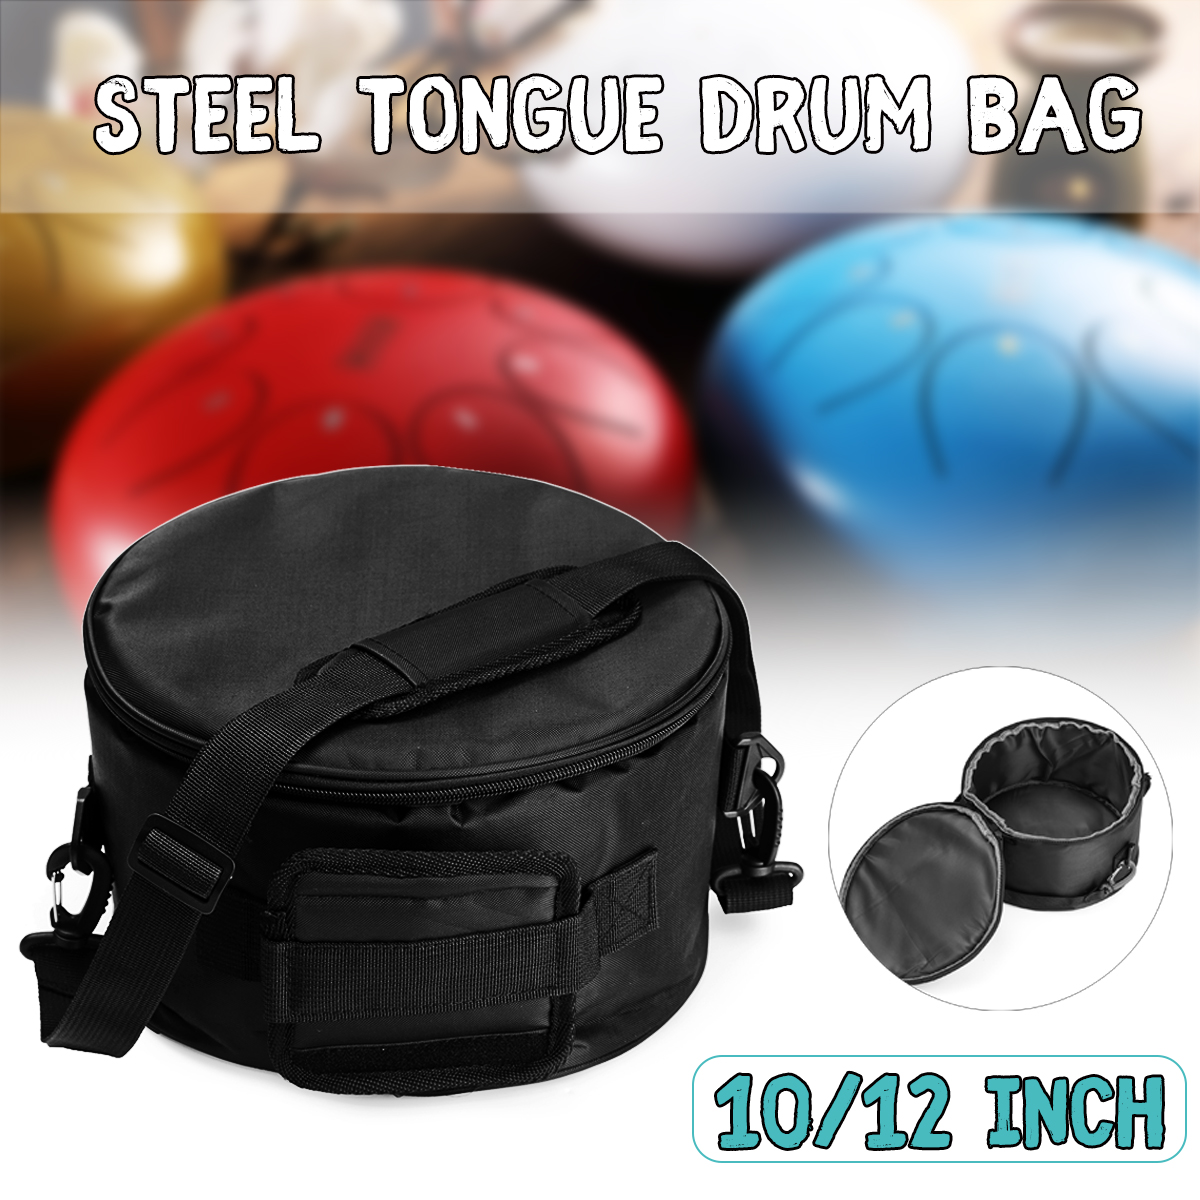 Steel-Tongue-Drum-Bag-Storage-Punch-Soulder-Crossbody-Bag-For-Outdoor-Camping-Leisure-Wear-1357124-3